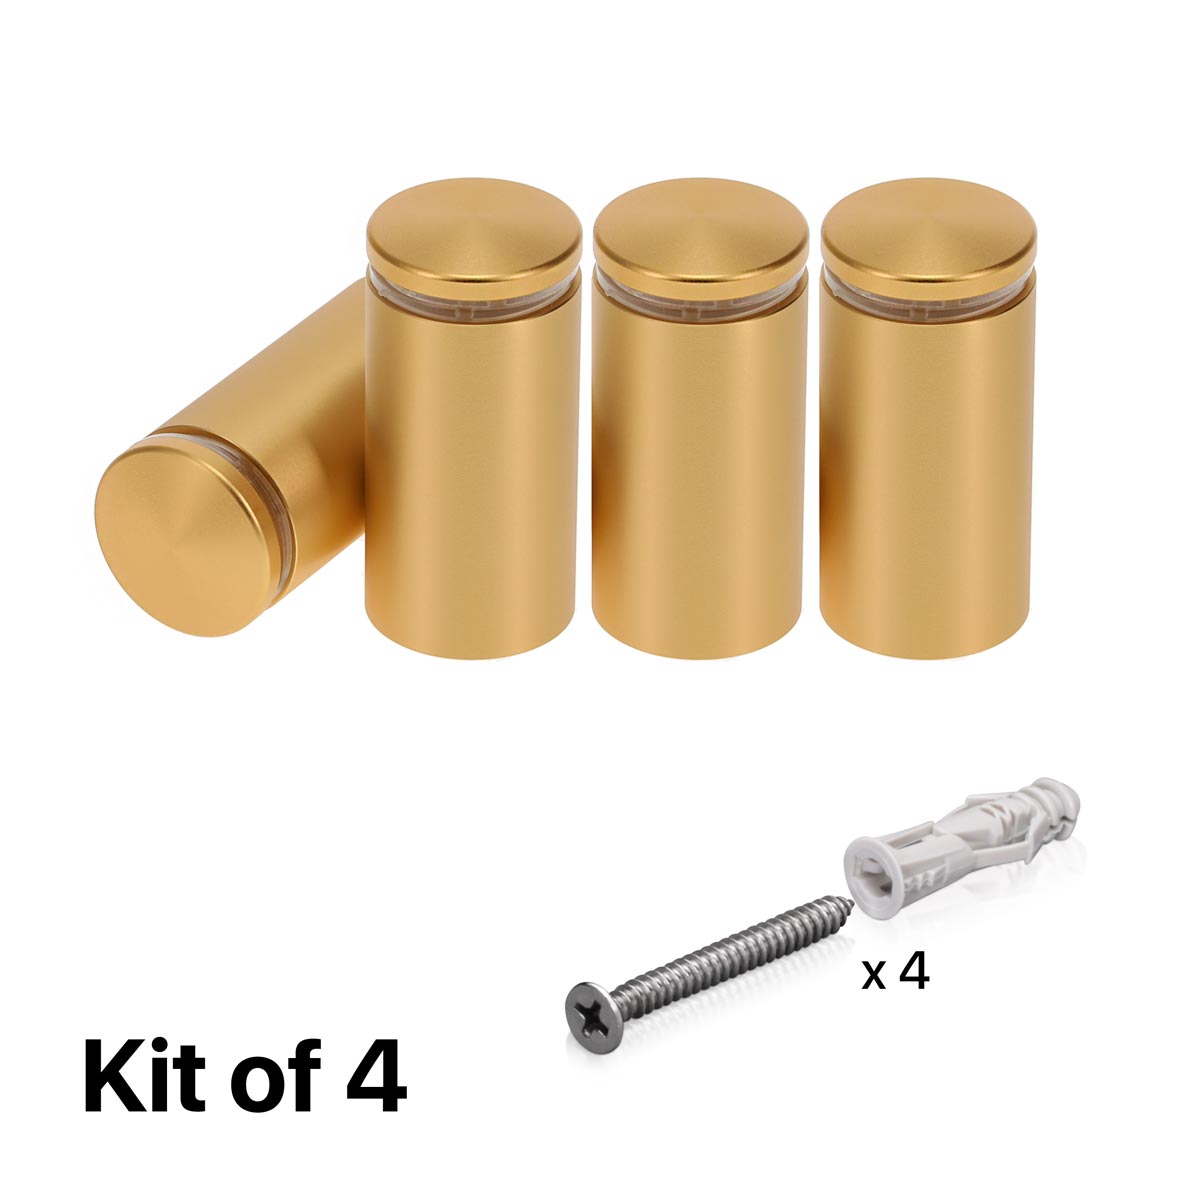 (Set of 4) 1'' Diameter X 1-3/4 Barrel Length, Alumi. Rounded Head Standoffs, Matte Champagne Anodized Finish Standoff with (4) 2216Z Screws and (4) LANC1 Anchors for concrete or drywall (For In / Out use) [Required Material Hole Size: 7/16'']